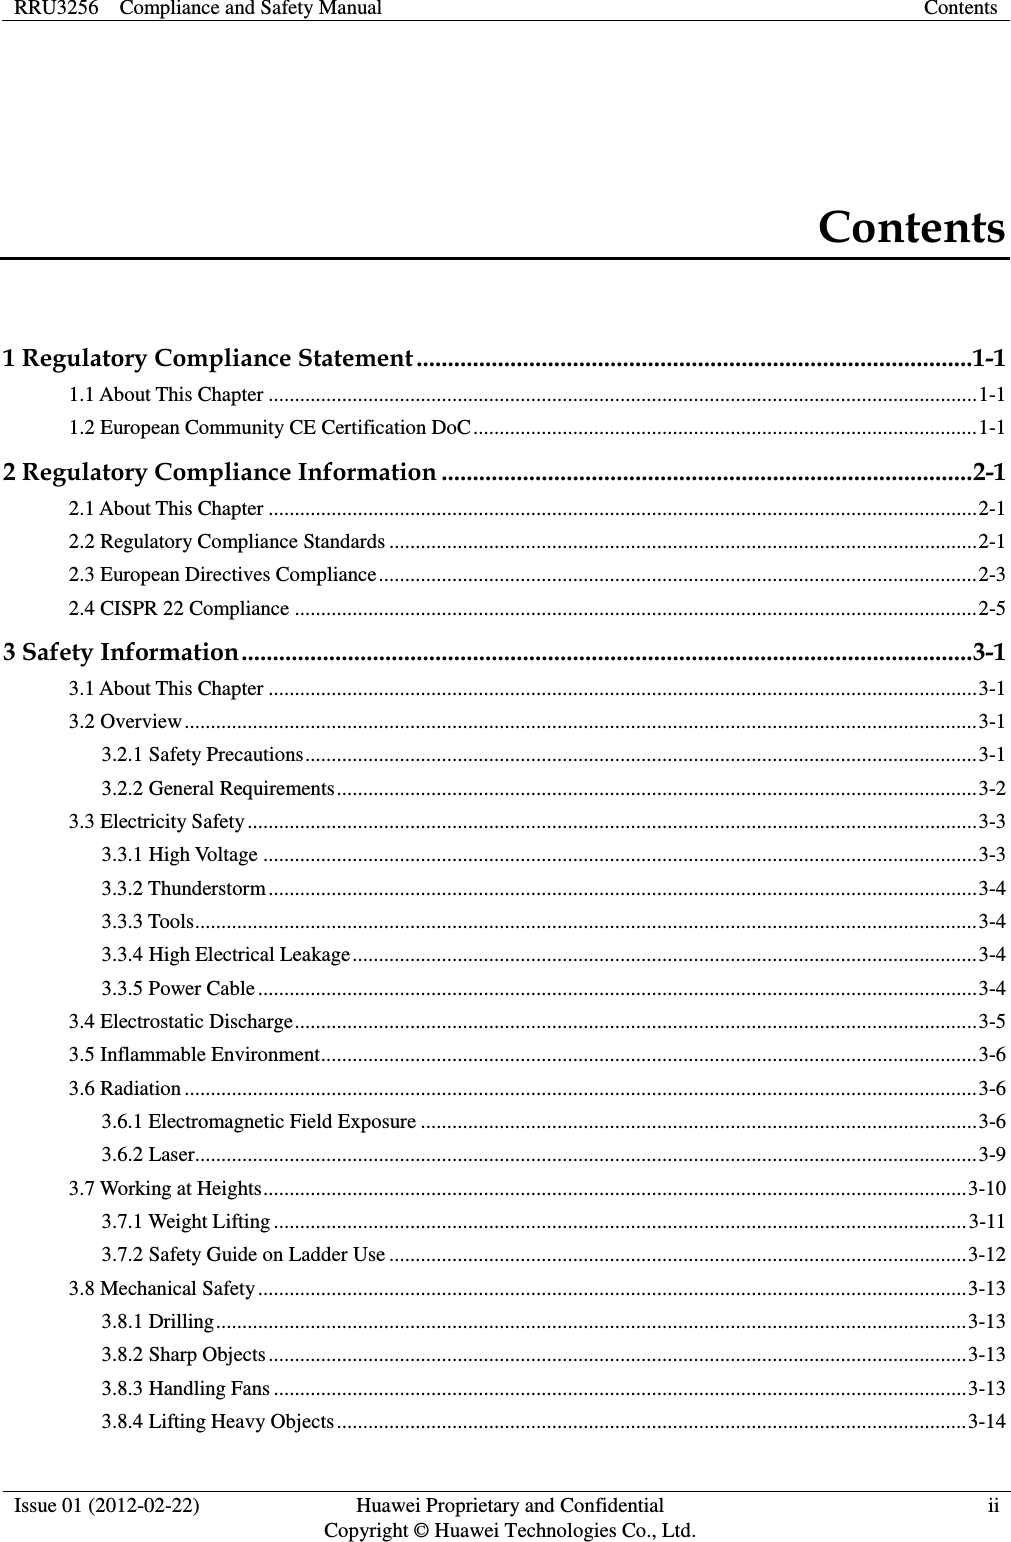 RRU3256    Compliance and Safety Manual Contents  Issue 01 (2012-02-22) Huawei Proprietary and Confidential         Copyright © Huawei Technologies Co., Ltd. ii  Contents 1 Regulatory Compliance Statement ......................................................................................... 1-1 1.1 About This Chapter ....................................................................................................................................... 1-1 1.2 European Community CE Certification DoC ................................................................................................ 1-1 2 Regulatory Compliance Information ..................................................................................... 2-1 2.1 About This Chapter ....................................................................................................................................... 2-1 2.2 Regulatory Compliance Standards ................................................................................................................ 2-1 2.3 European Directives Compliance .................................................................................................................. 2-3 2.4 CISPR 22 Compliance .................................................................................................................................. 2-5 3 Safety Information ..................................................................................................................... 3-1 3.1 About This Chapter ....................................................................................................................................... 3-1 3.2 Overview ....................................................................................................................................................... 3-1 3.2.1 Safety Precautions ................................................................................................................................ 3-1 3.2.2 General Requirements .......................................................................................................................... 3-2 3.3 Electricity Safety ........................................................................................................................................... 3-3 3.3.1 High Voltage ........................................................................................................................................ 3-3 3.3.2 Thunderstorm ....................................................................................................................................... 3-4 3.3.3 Tools ..................................................................................................................................................... 3-4 3.3.4 High Electrical Leakage ....................................................................................................................... 3-4 3.3.5 Power Cable ......................................................................................................................................... 3-4 3.4 Electrostatic Discharge .................................................................................................................................. 3-5 3.5 Inflammable Environment ............................................................................................................................. 3-6 3.6 Radiation ....................................................................................................................................................... 3-6 3.6.1 Electromagnetic Field Exposure .......................................................................................................... 3-6 3.6.2 Laser..................................................................................................................................................... 3-9 3.7 Working at Heights ...................................................................................................................................... 3-10 3.7.1 Weight Lifting .................................................................................................................................... 3-11 3.7.2 Safety Guide on Ladder Use .............................................................................................................. 3-12 3.8 Mechanical Safety ....................................................................................................................................... 3-13 3.8.1 Drilling ............................................................................................................................................... 3-13 3.8.2 Sharp Objects ..................................................................................................................................... 3-13 3.8.3 Handling Fans .................................................................................................................................... 3-13 3.8.4 Lifting Heavy Objects ........................................................................................................................ 3-14 